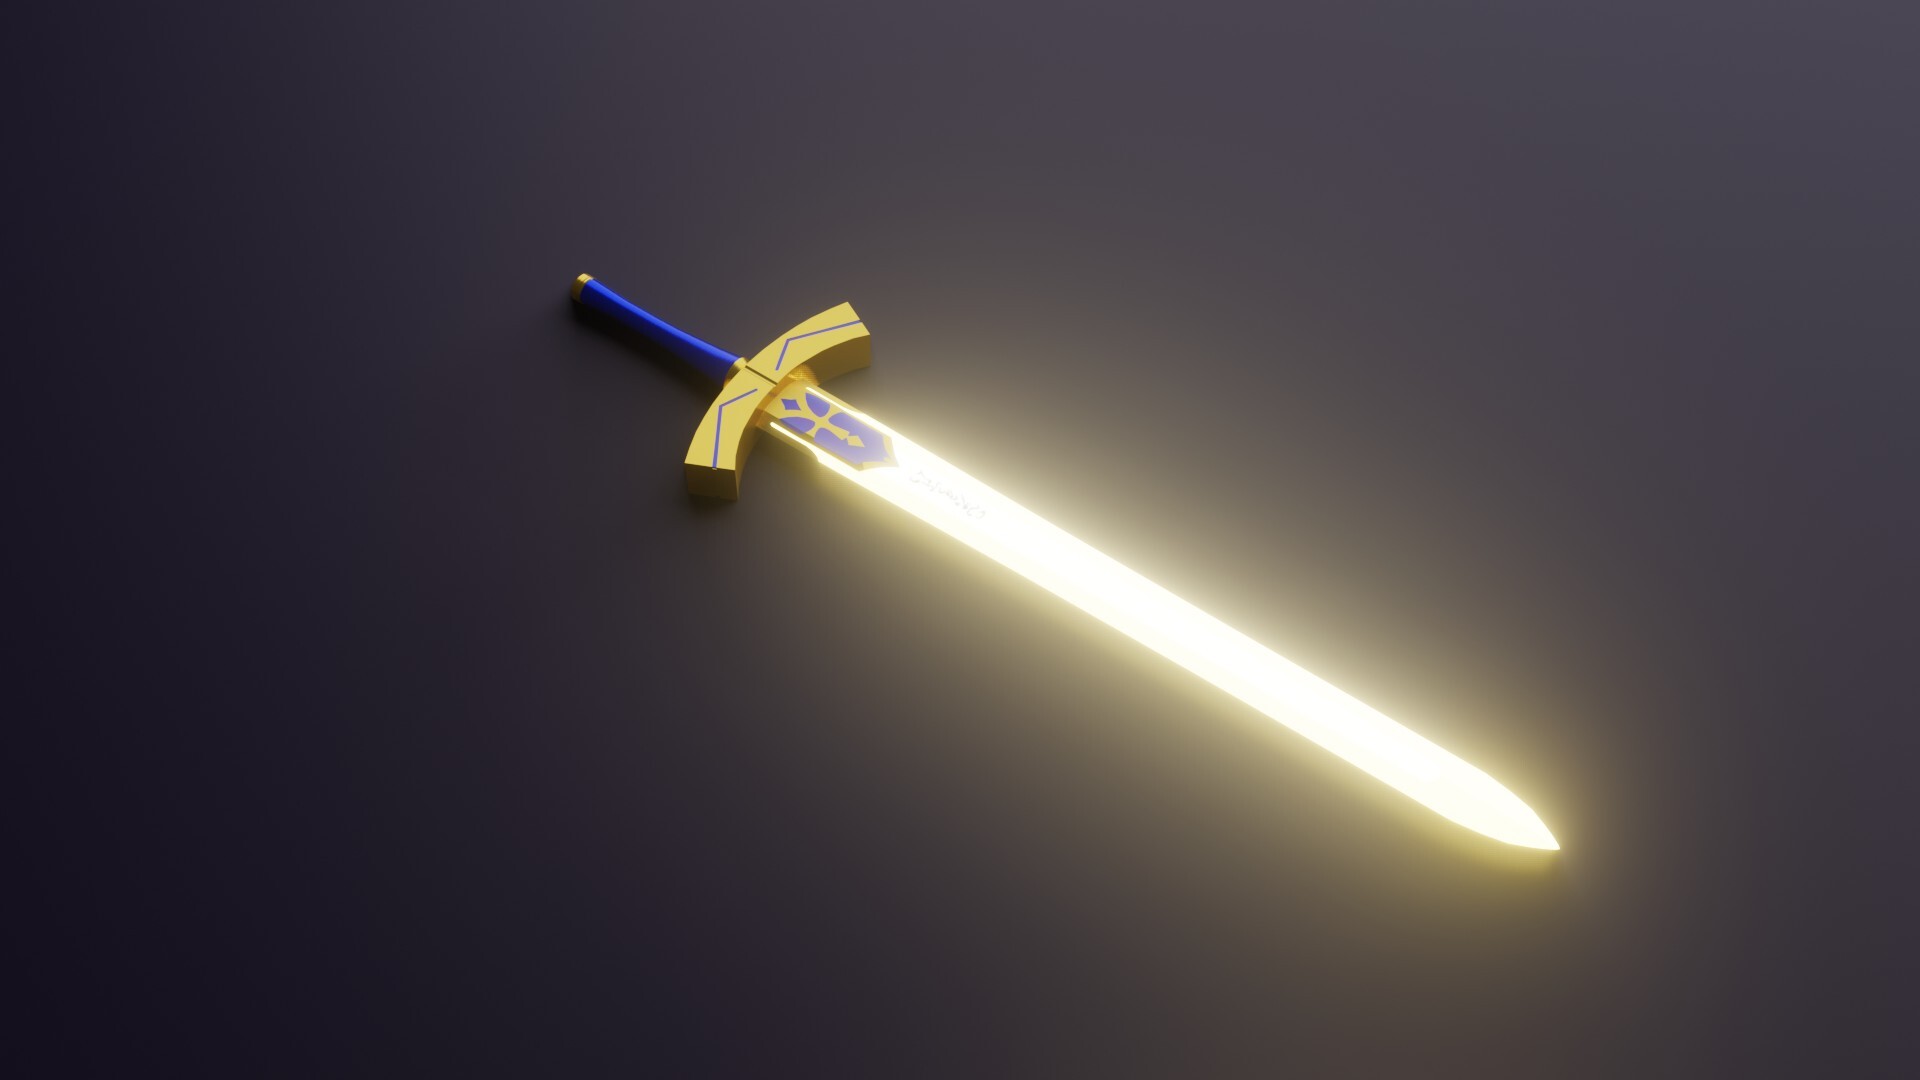 ArtStation - [3D Model] Excalibur from Fate/Stay Night & Fate/Zero